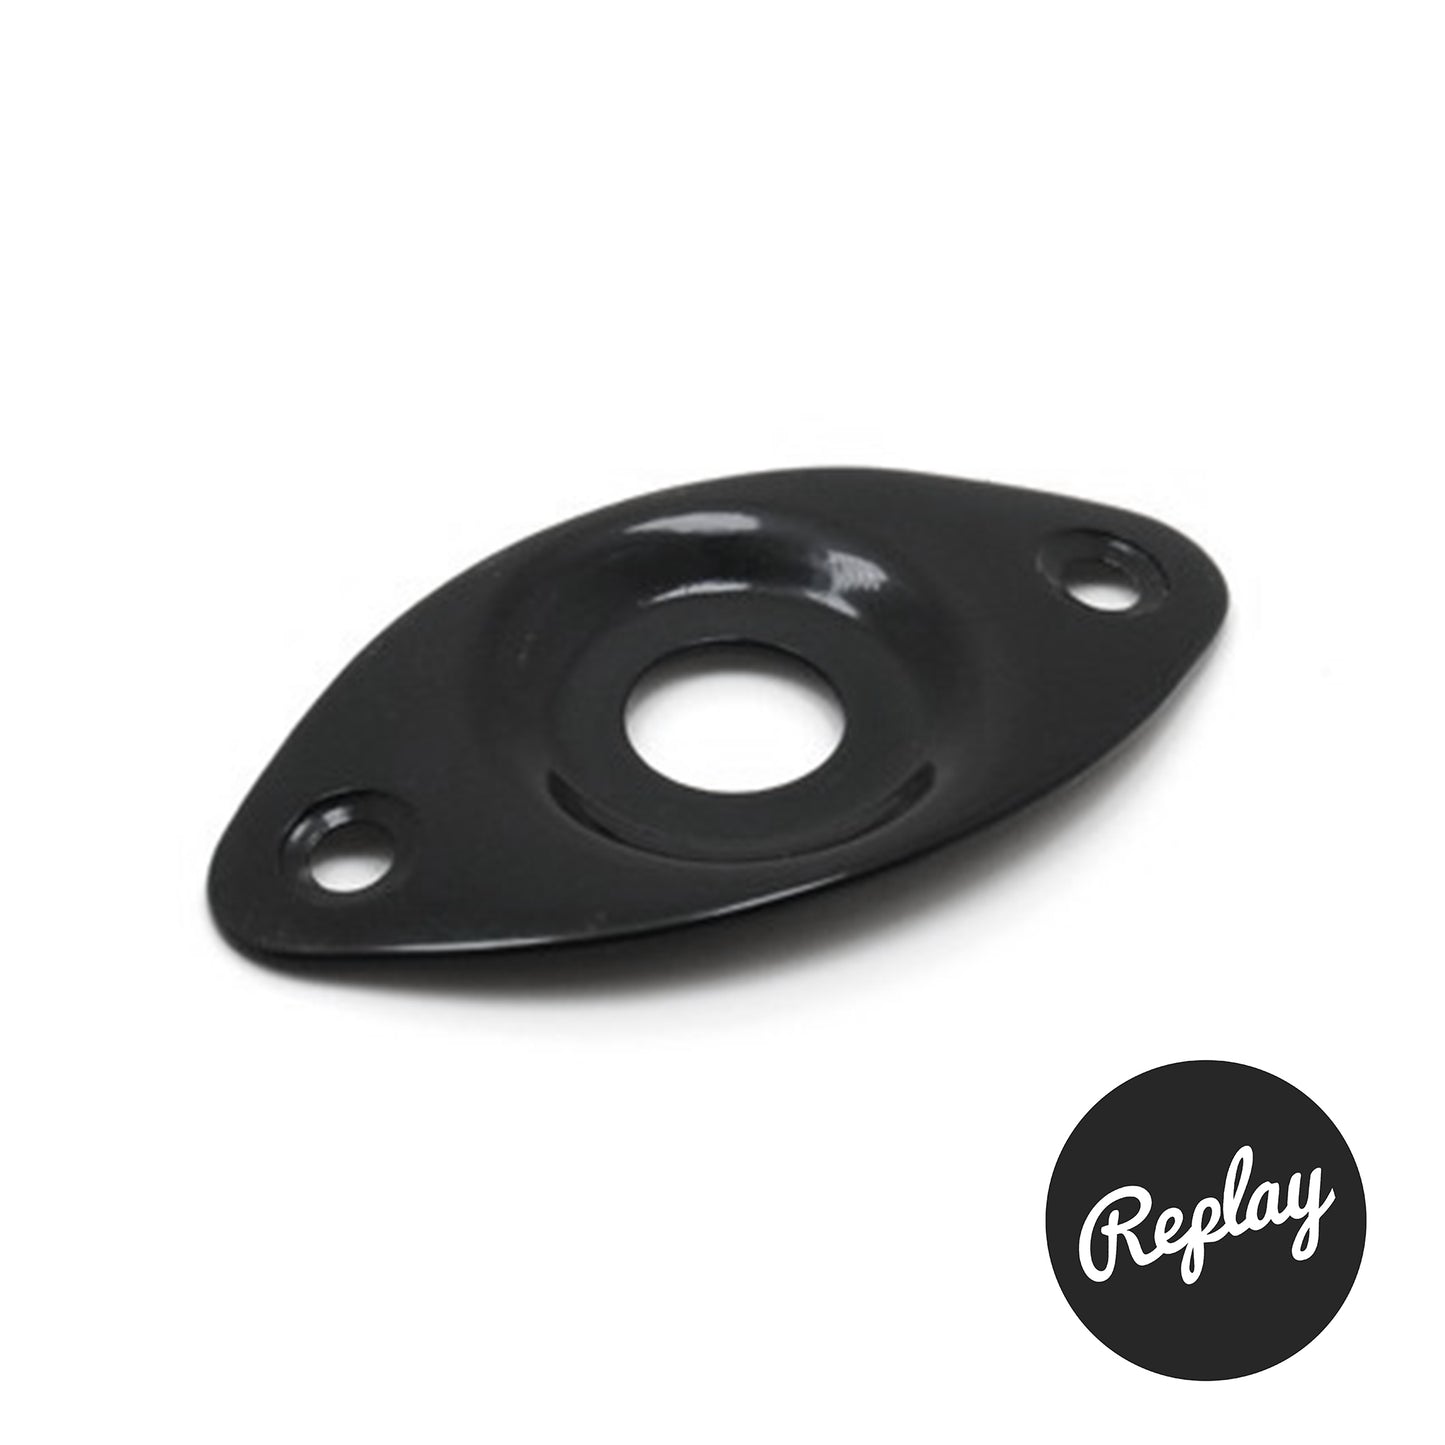 Oval Metal Jack Plate with Recessed Input